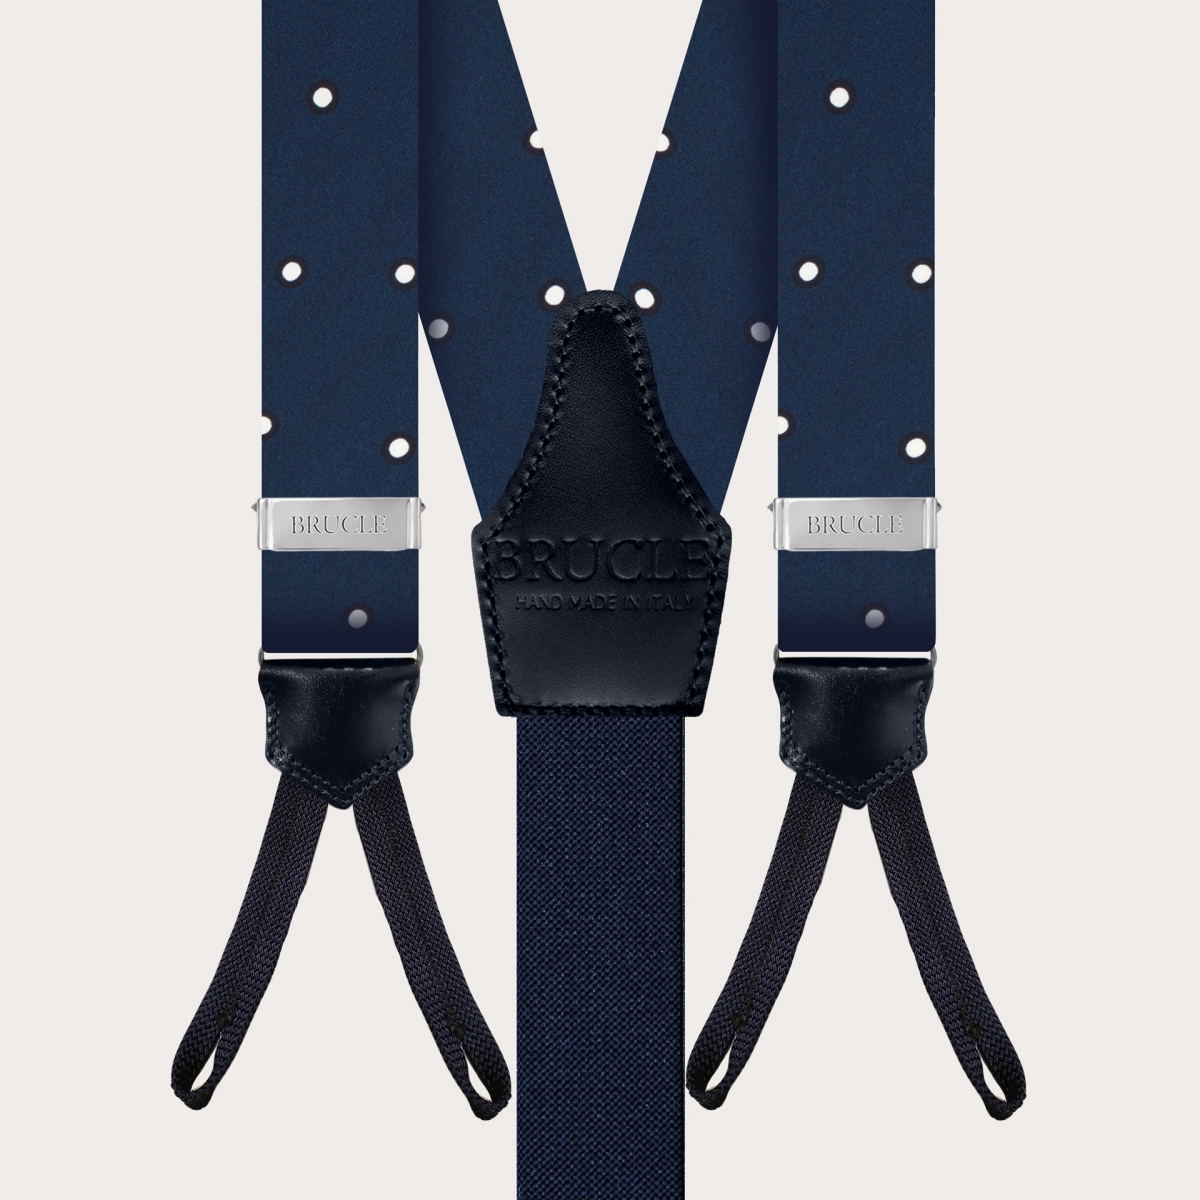 BRUCLE Elegant silk suspenders with buttonholes, blue with white polka dot pattern